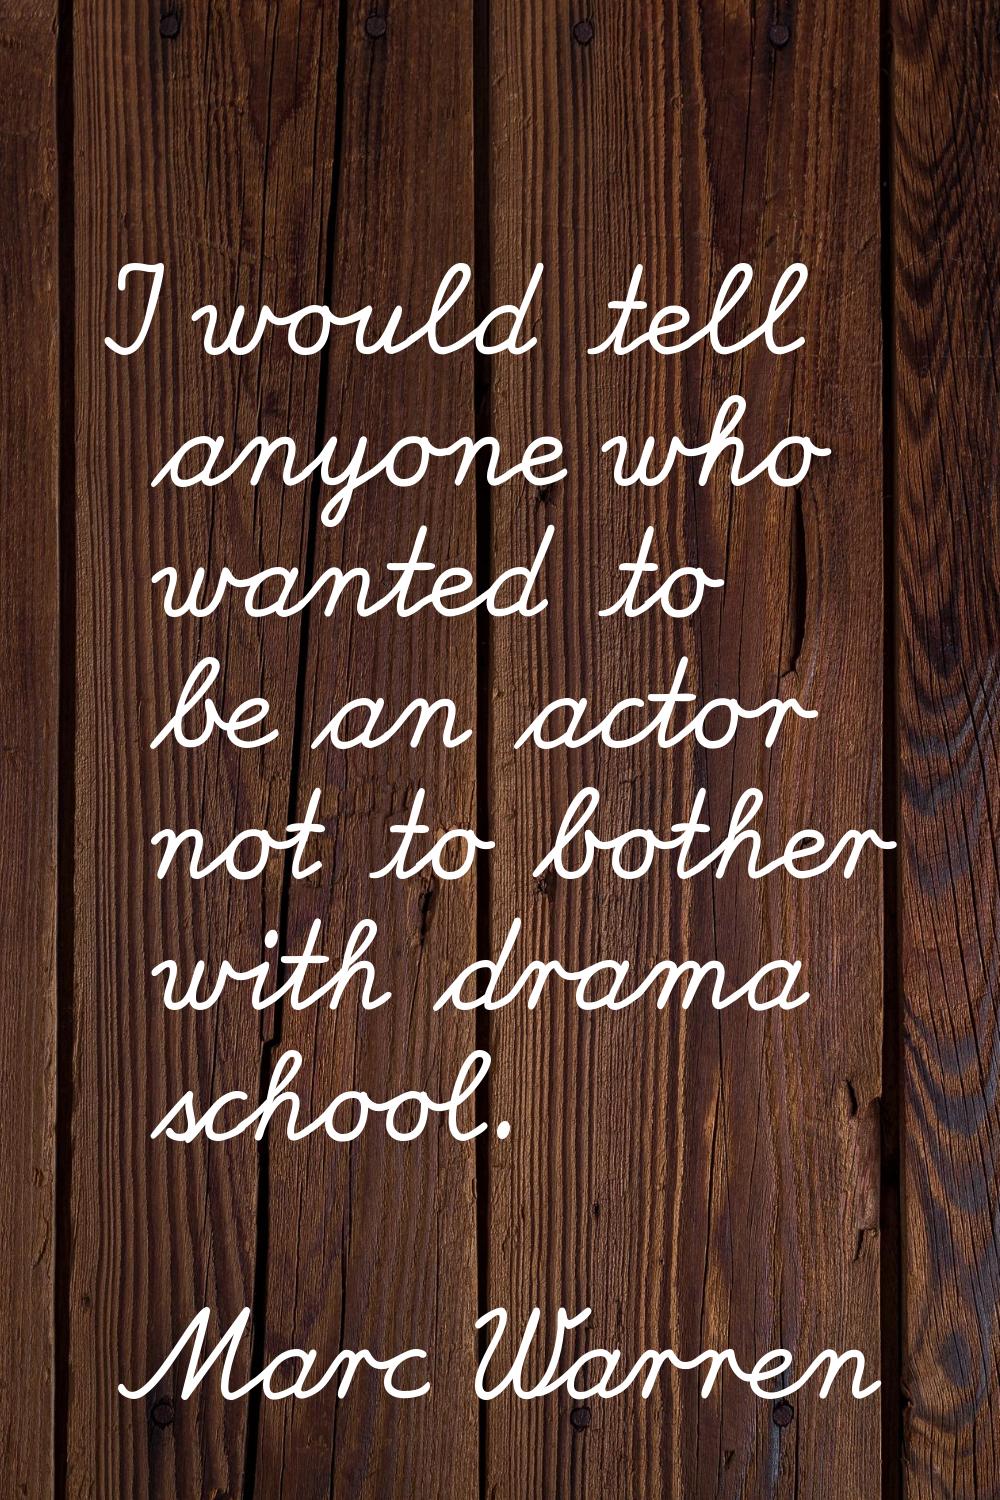 I would tell anyone who wanted to be an actor not to bother with drama school.